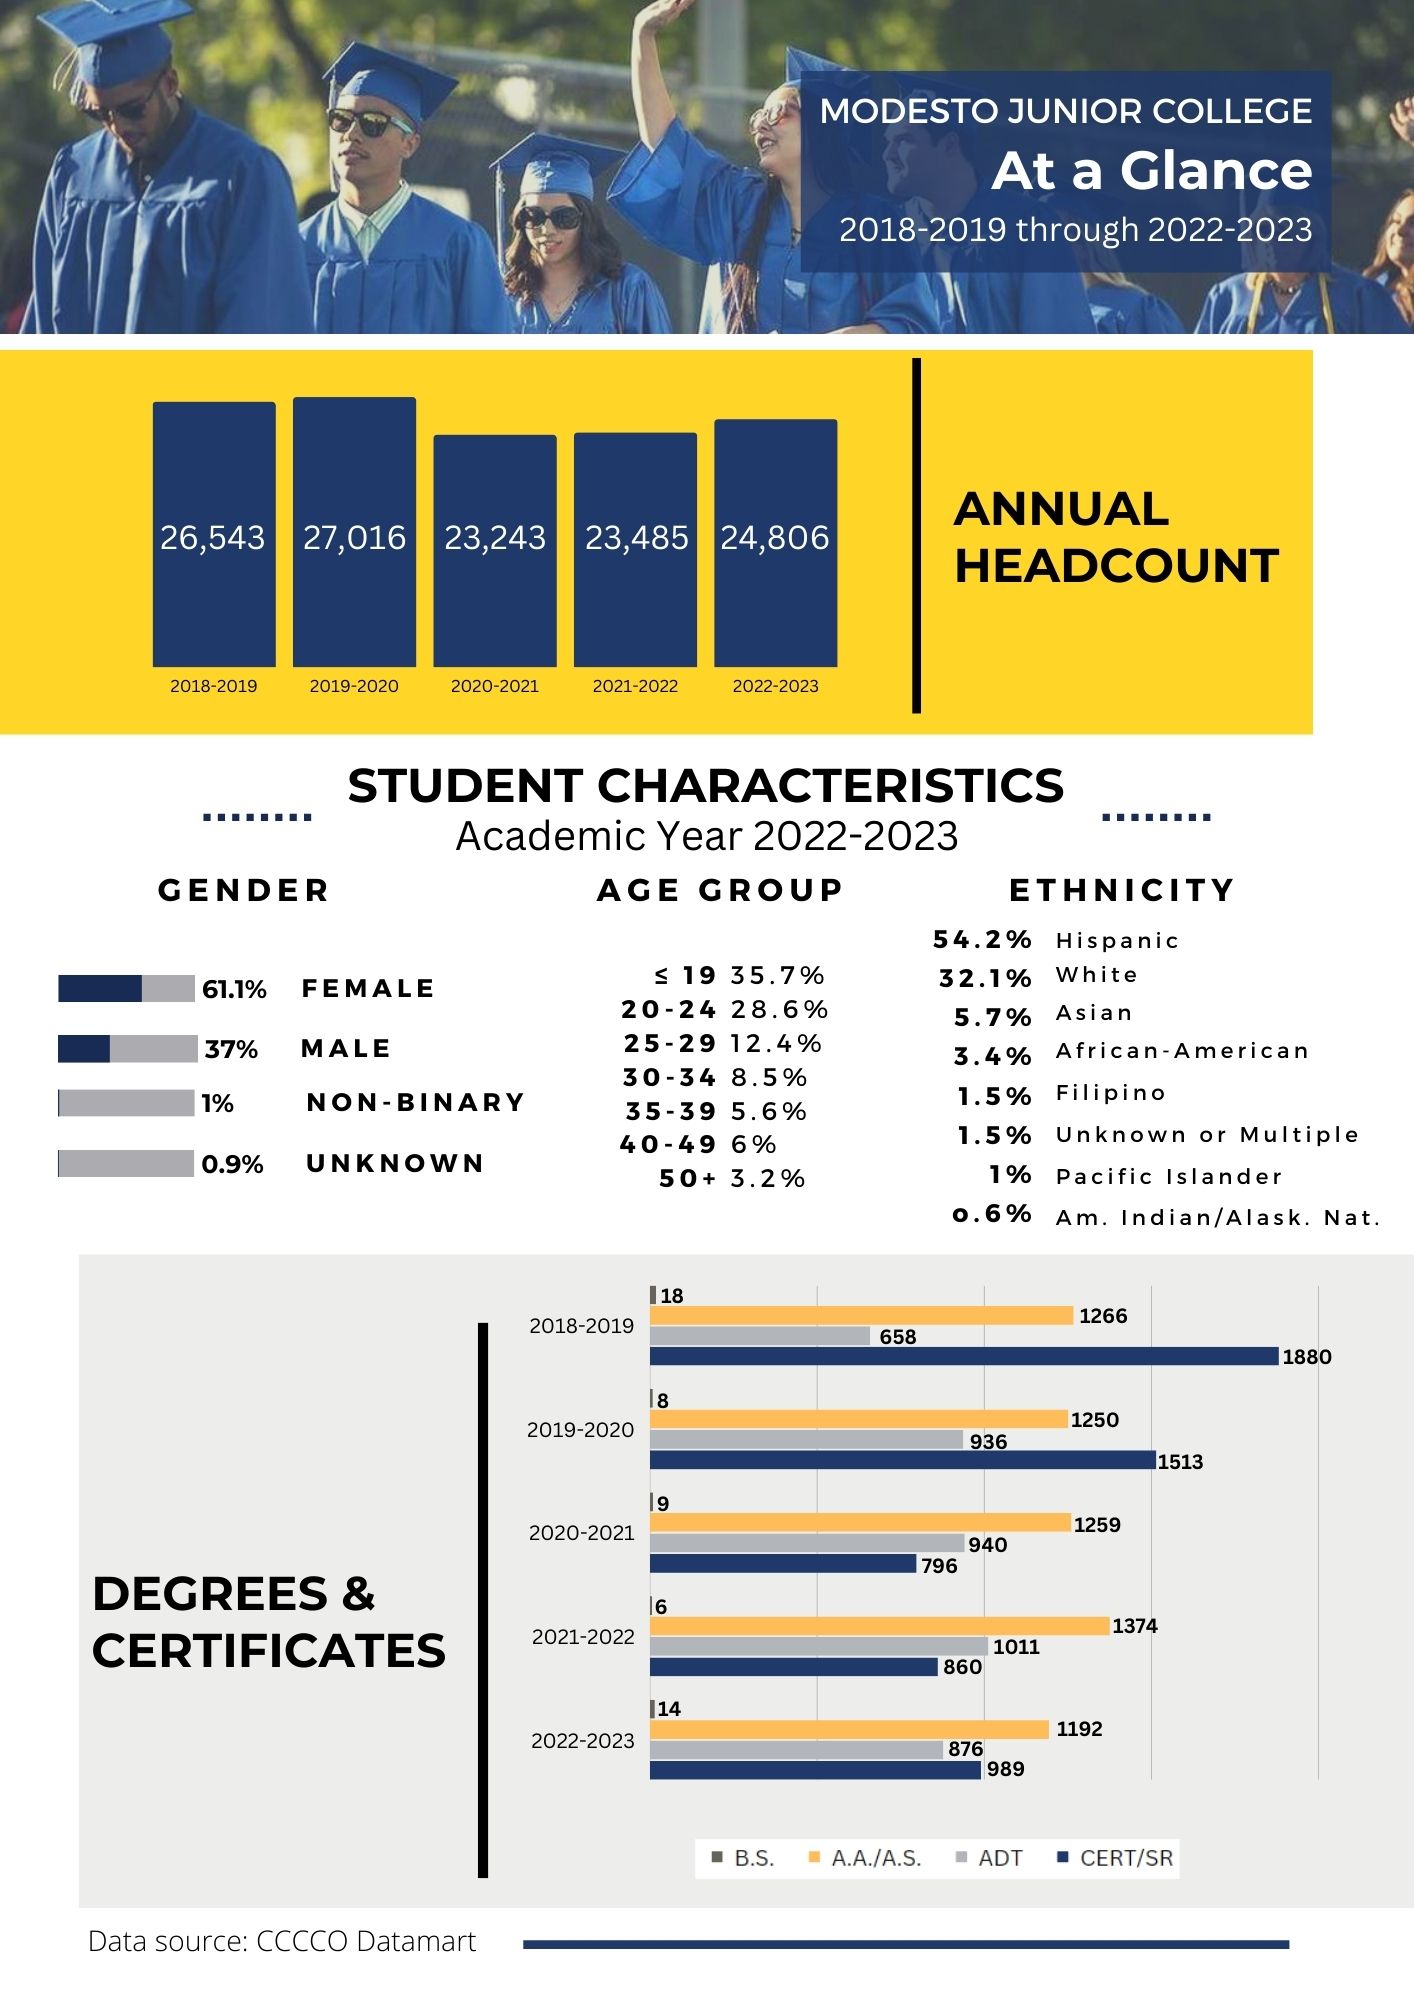 MJC At a Glance (Infographic): 2018-2019 Through 2022-2023 MJC Annual Headcount Infographic: 2018-2019: 26543. 2019-2020: 27016. 2020-2021: 23243. 2021-2022: 23485. 2022-2023: 24806. Student Characteristics Infographic Academic Year 2022-2023: Gender – 61.1% Female, 37% Male, 1% Non-Binary, 0.9% Unknown. Age Group – 35.7% 19 or younger, 28.6% 20-24, 12.4% 25-29, 8.5% 30-34, 5.6% 35-39, 6% 40-49, 3.2% 50+. Ethnicity – 54.2% Hispanic, 32.1% White, 5.7% Asian, 3.4% African-American, 1.5% Filipino, 1.5% Unknown or Multiple, 1% Pacific Islander, 0.6% American Indian/Alaskan Native. Degrees and Certificates Infographic by year and award type: 2018-2019: 18 BS, 1266 AA/AS, 658 ADT, 1880 Cert/SR.  2019-2020: 8 BS, 1250 AA/AS, 936 ADT, 1513 Cert/SR.  2020-2021: 9 BS, 1259 AA/AS, 940 ADT, 796 Cert/SR. 2021-2022: 6 BS, 1374 AA/AS, 1011 ADT, 860 Cert/SR. 2022-2023: 14 BS, 1192 AA/AS, 876 ADT, 989 Cert/SR.